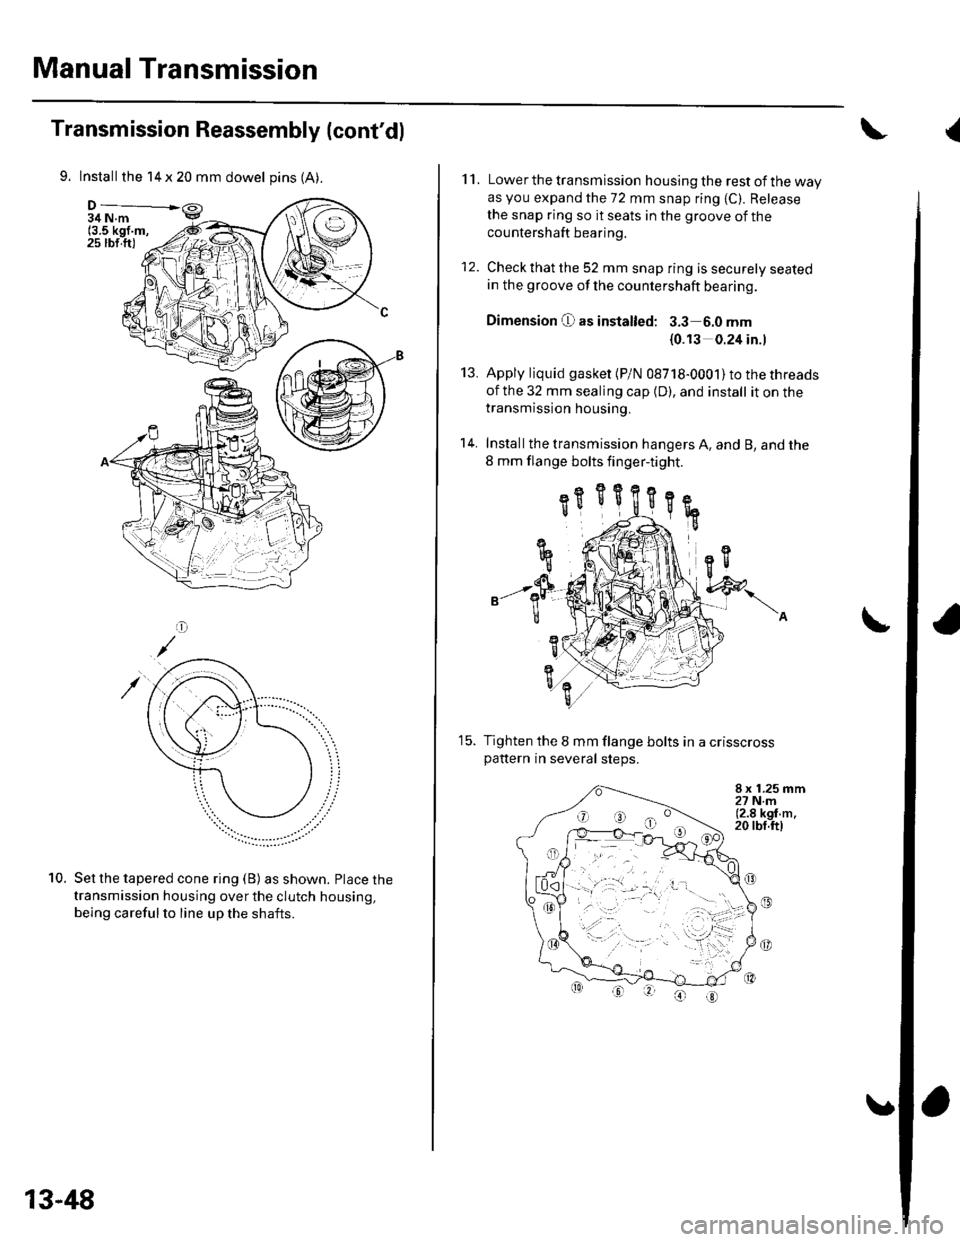 HONDA CIVIC 2003 7.G Workshop Manual Manual Transmission
Transmission Reassembly (contdl
9. Install the 14 x 20 mm dowel pins (A).
34 N.m(3.5 kgf.m,25 rbf.ft)
Set the tapered cone ring (B) as shown. Place the
transmission housing over t